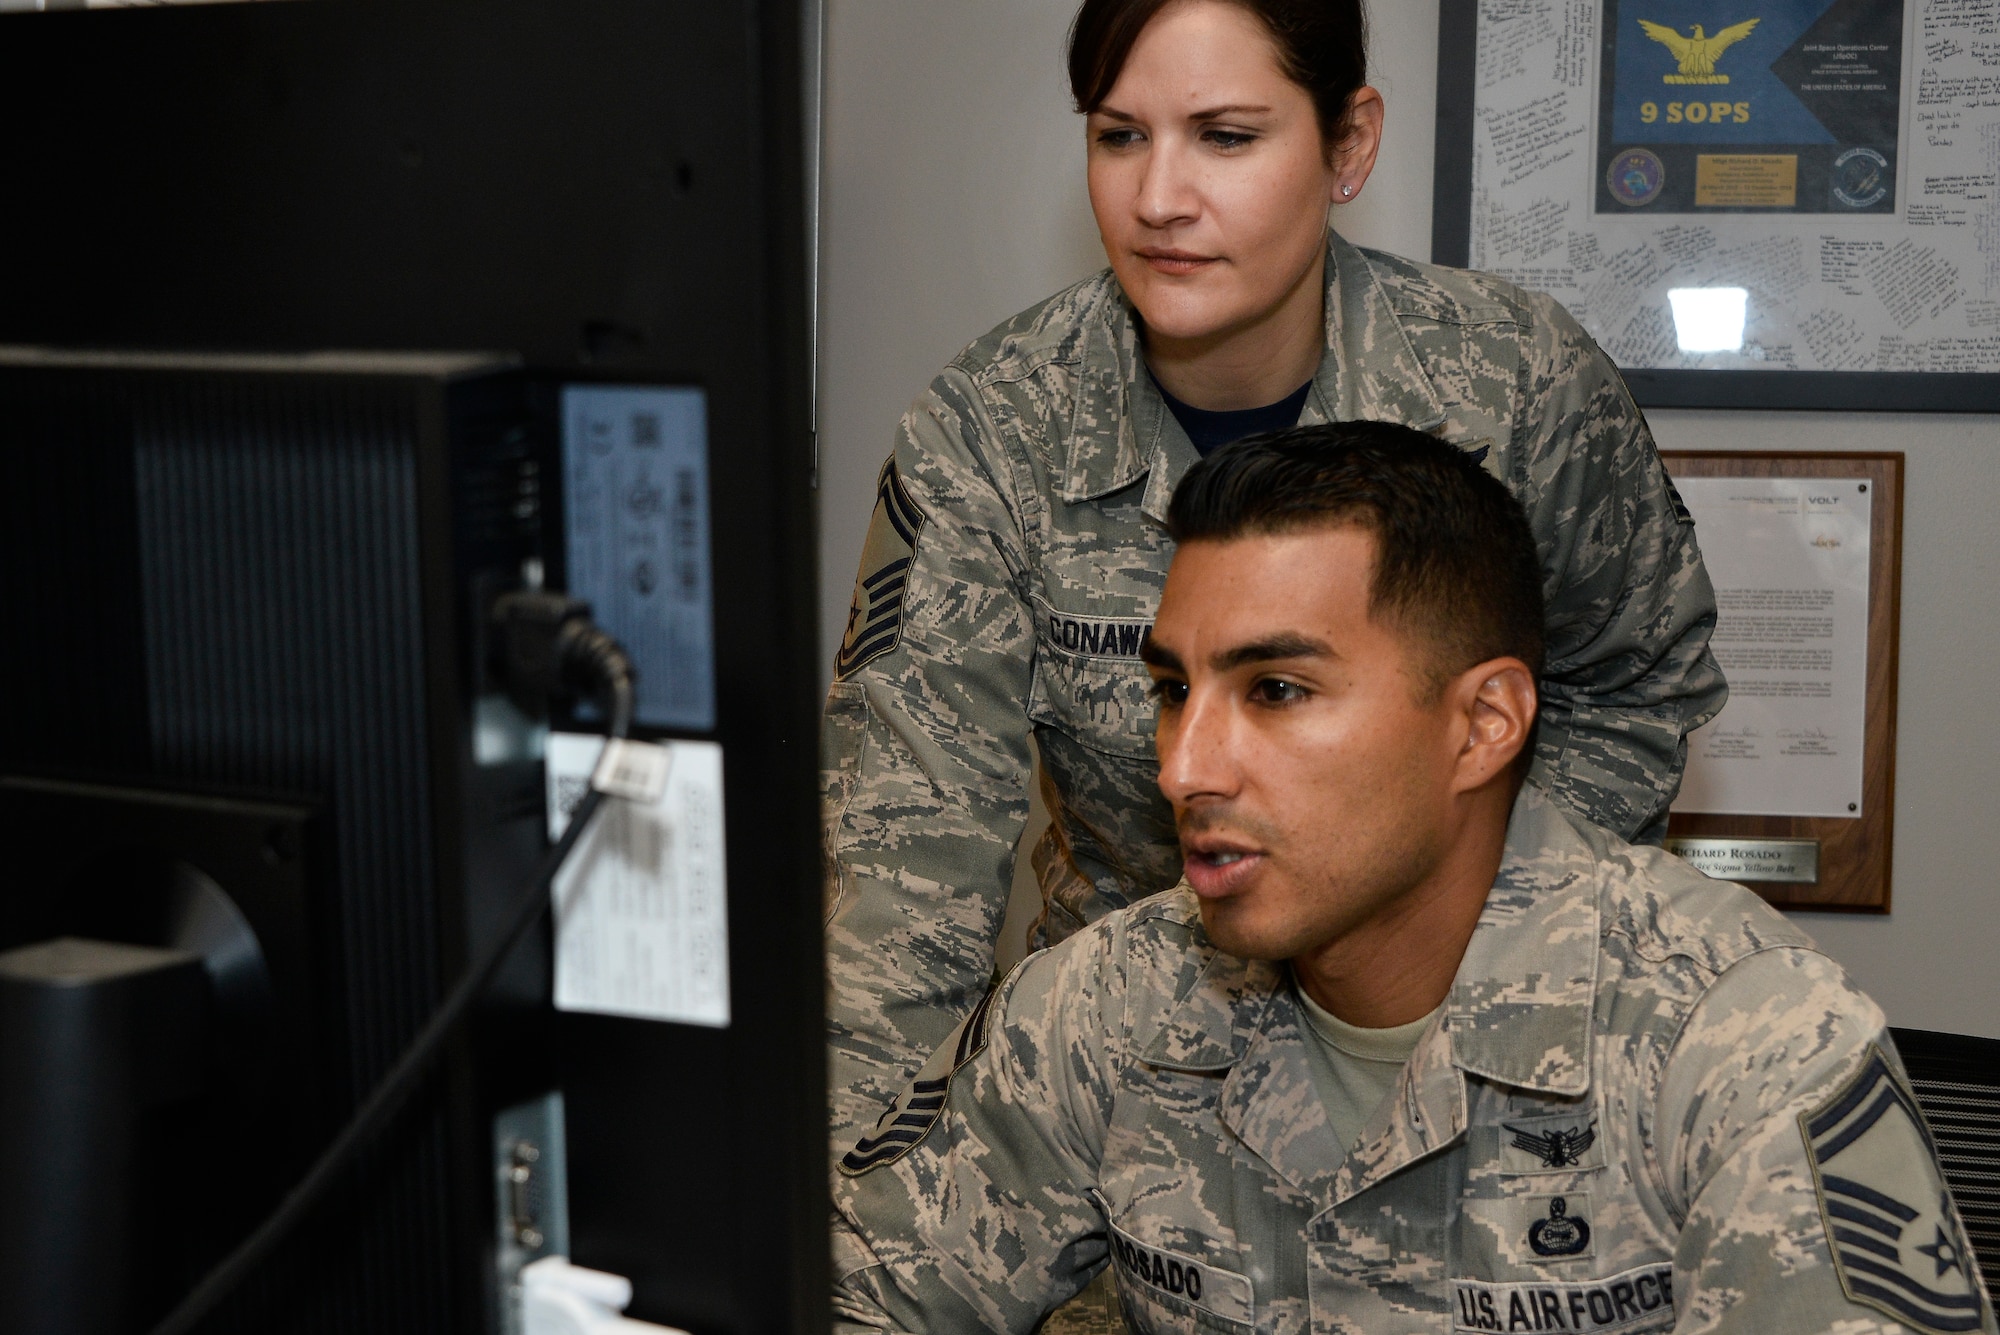 Senior Master Sgt. Kori Conway, and SMSgt Richard Rosado 16th Intelligence Squadron operation superintendent, look over production reports November 9, 2018 at Fort George G. Meade, Maryland. In a recent overlook, Reserve Airmen complete close to 20 percent of the Air Force mission to include flying and special missions. (U.S. Air Force photo by Staff Sgt. Alexandre Montes)